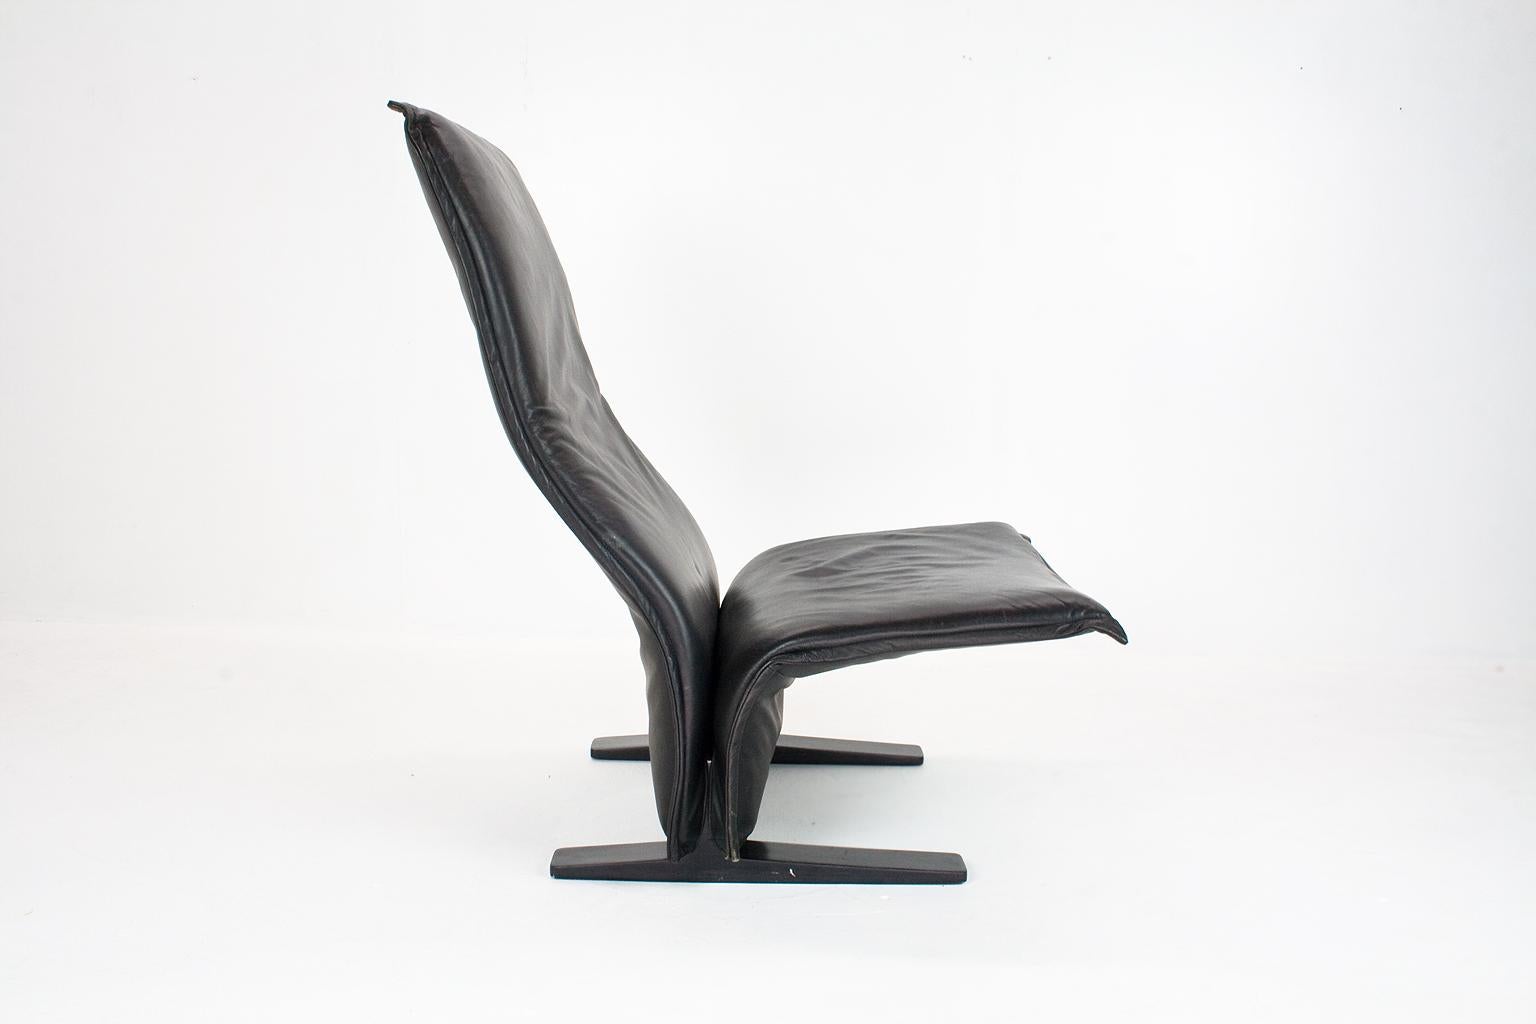 Original 1960s black leather Concorde (F784) lounge chair by Pierre Paulin with piping and aluminium base in black powder coating. In great vintage condition, great comfort.

Originally designed for the waiting room of the French Concorde aircraft